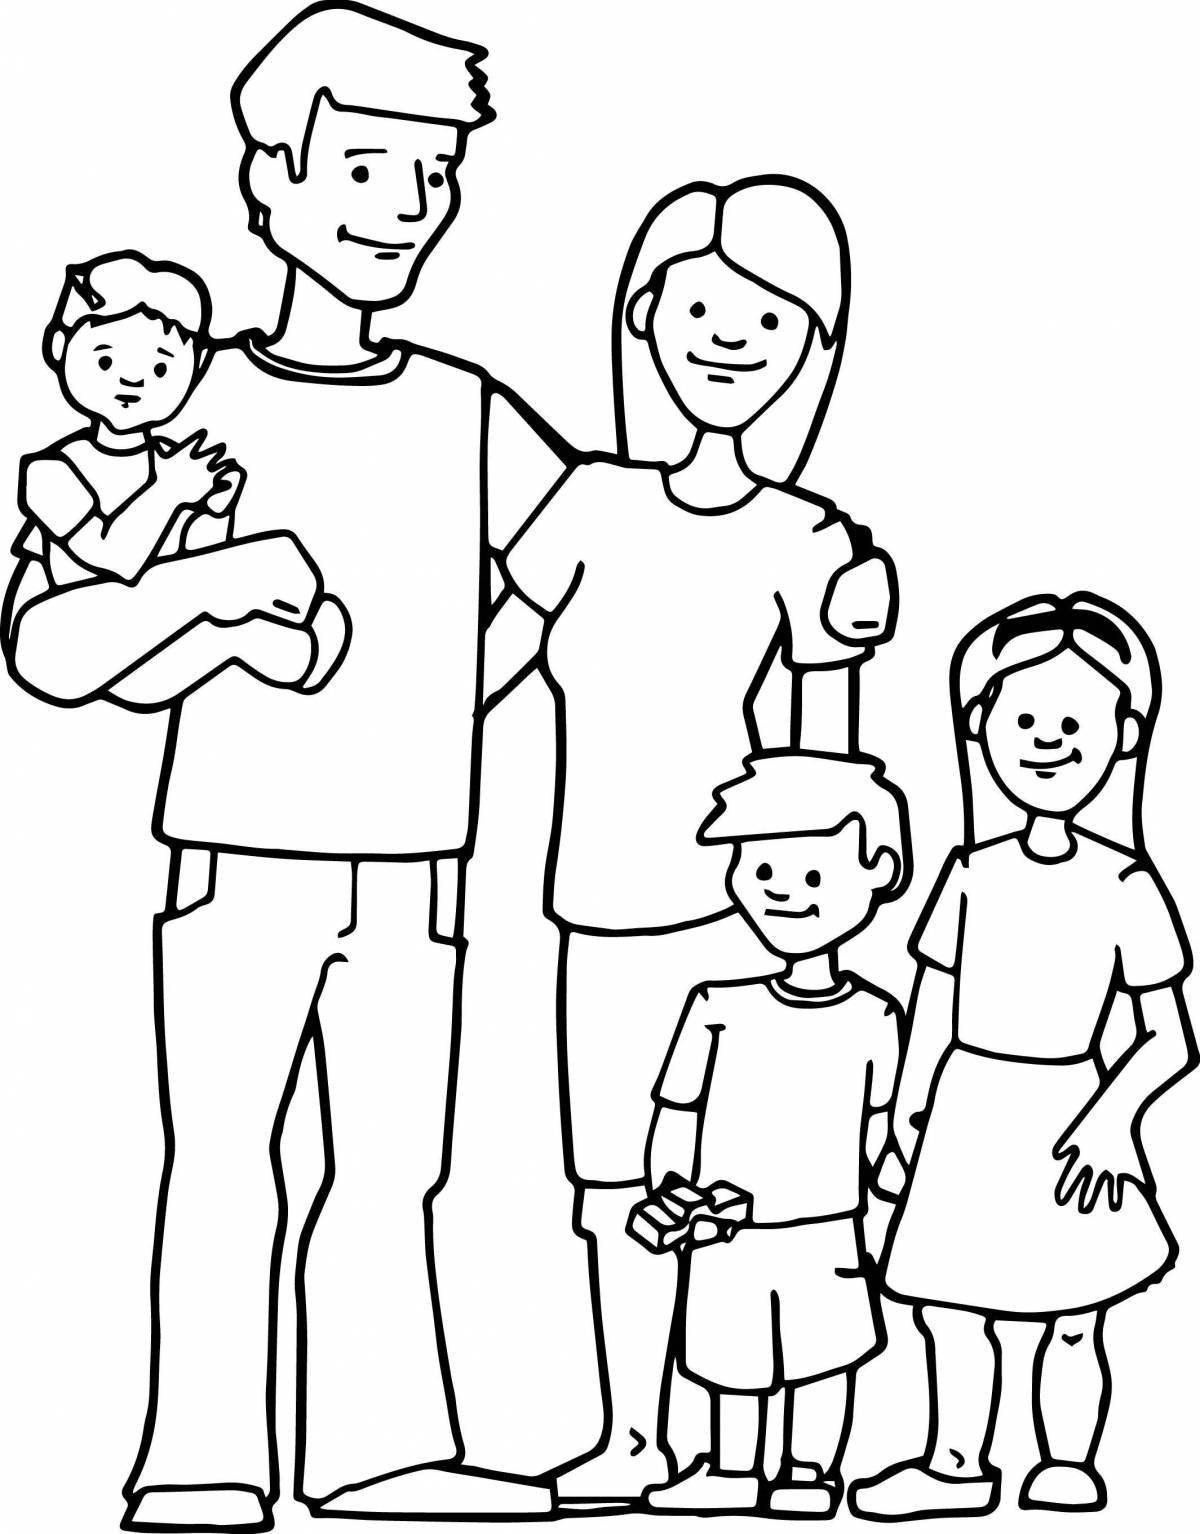 Bright family coloring for children 7 years old